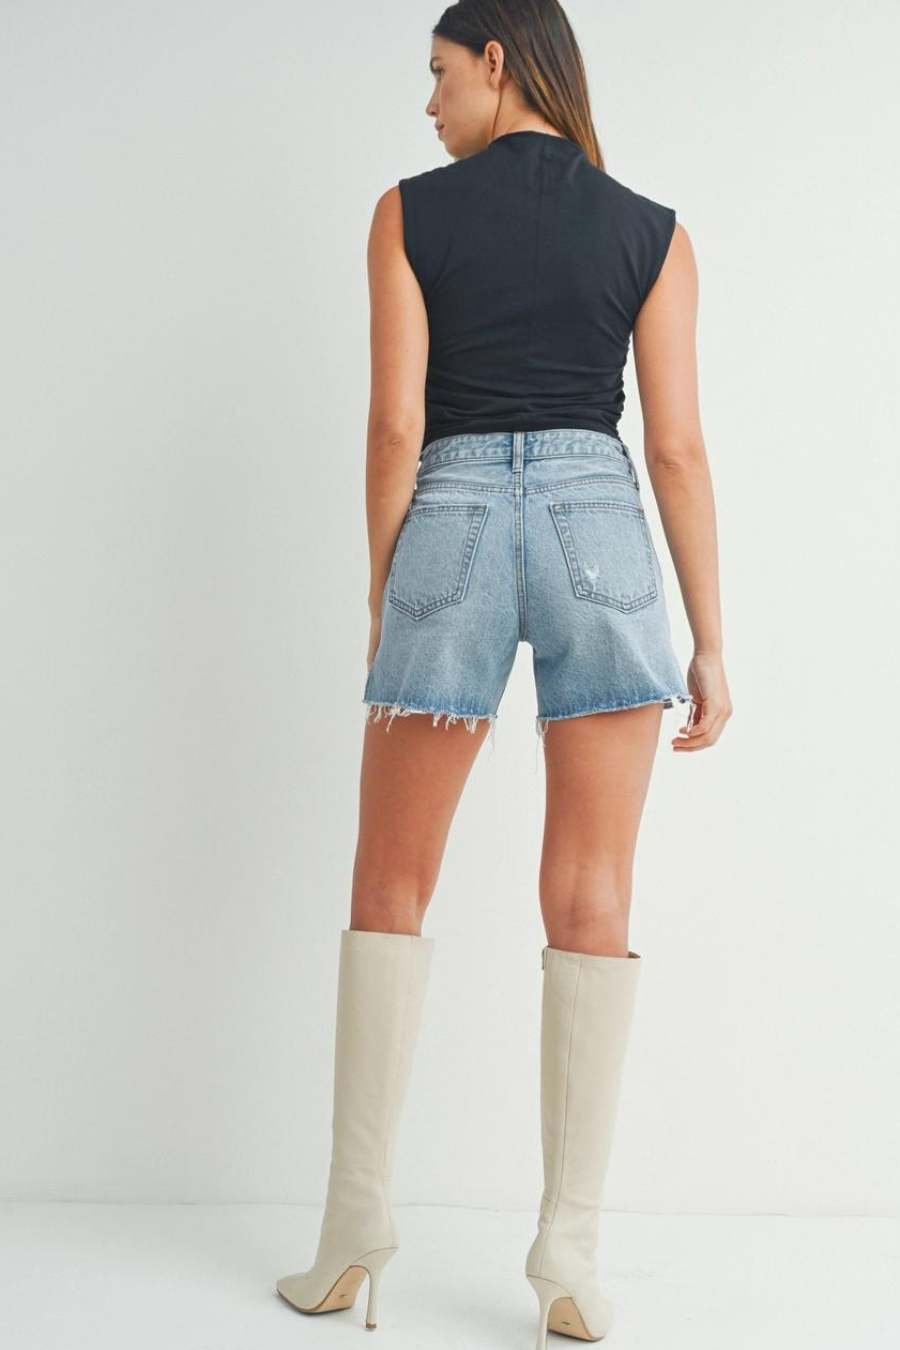 back shot of girl wearing black tank top and denim shorts paired with white boots 